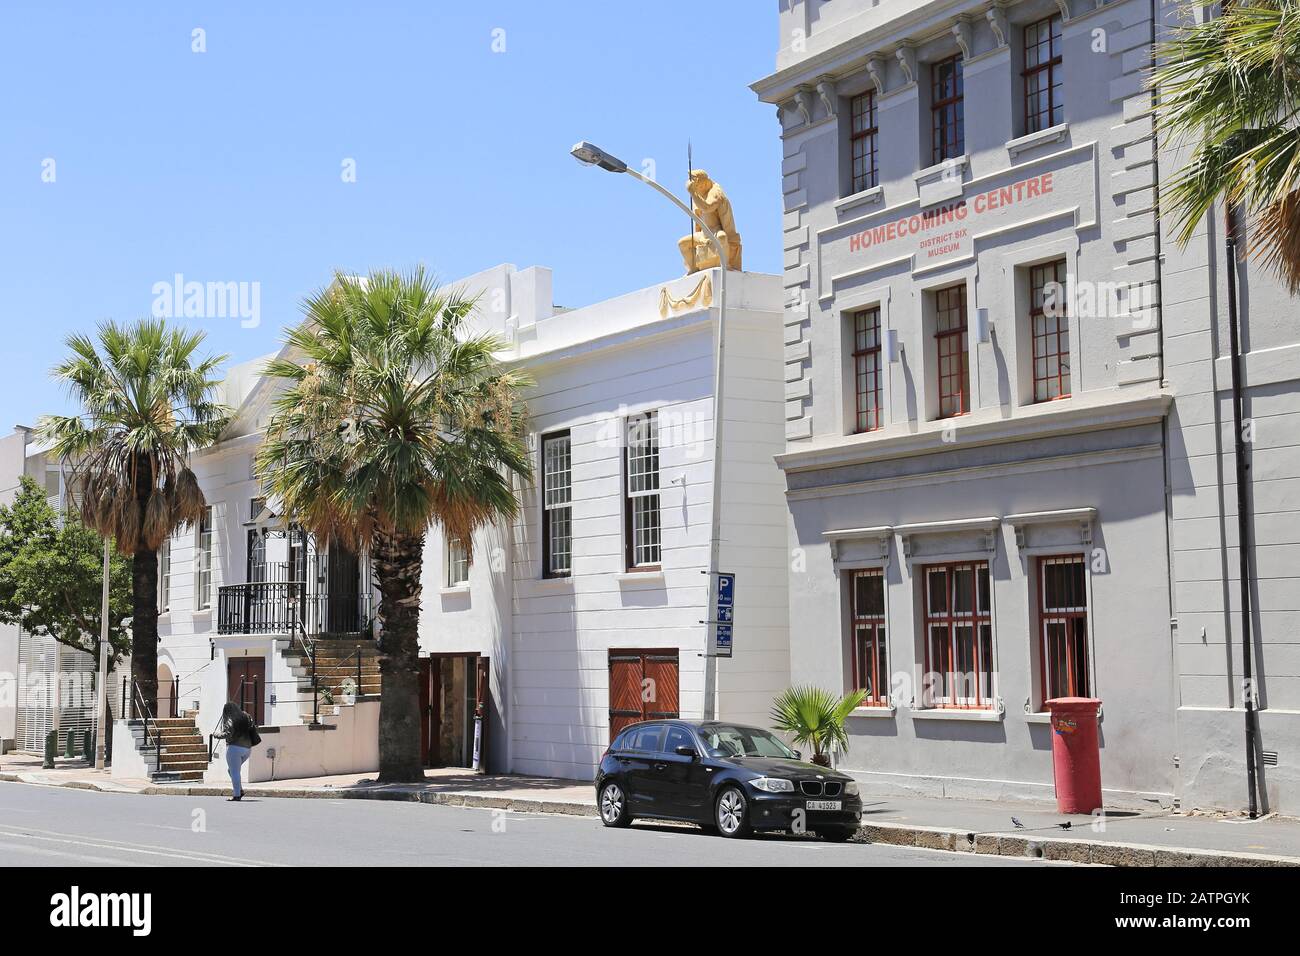 The Old Granary and Homecoming Centre, Buitenkant Street, CBD, Cape Town, Table Bay, Western Cape Province, South Africa, Africa Stock Photo